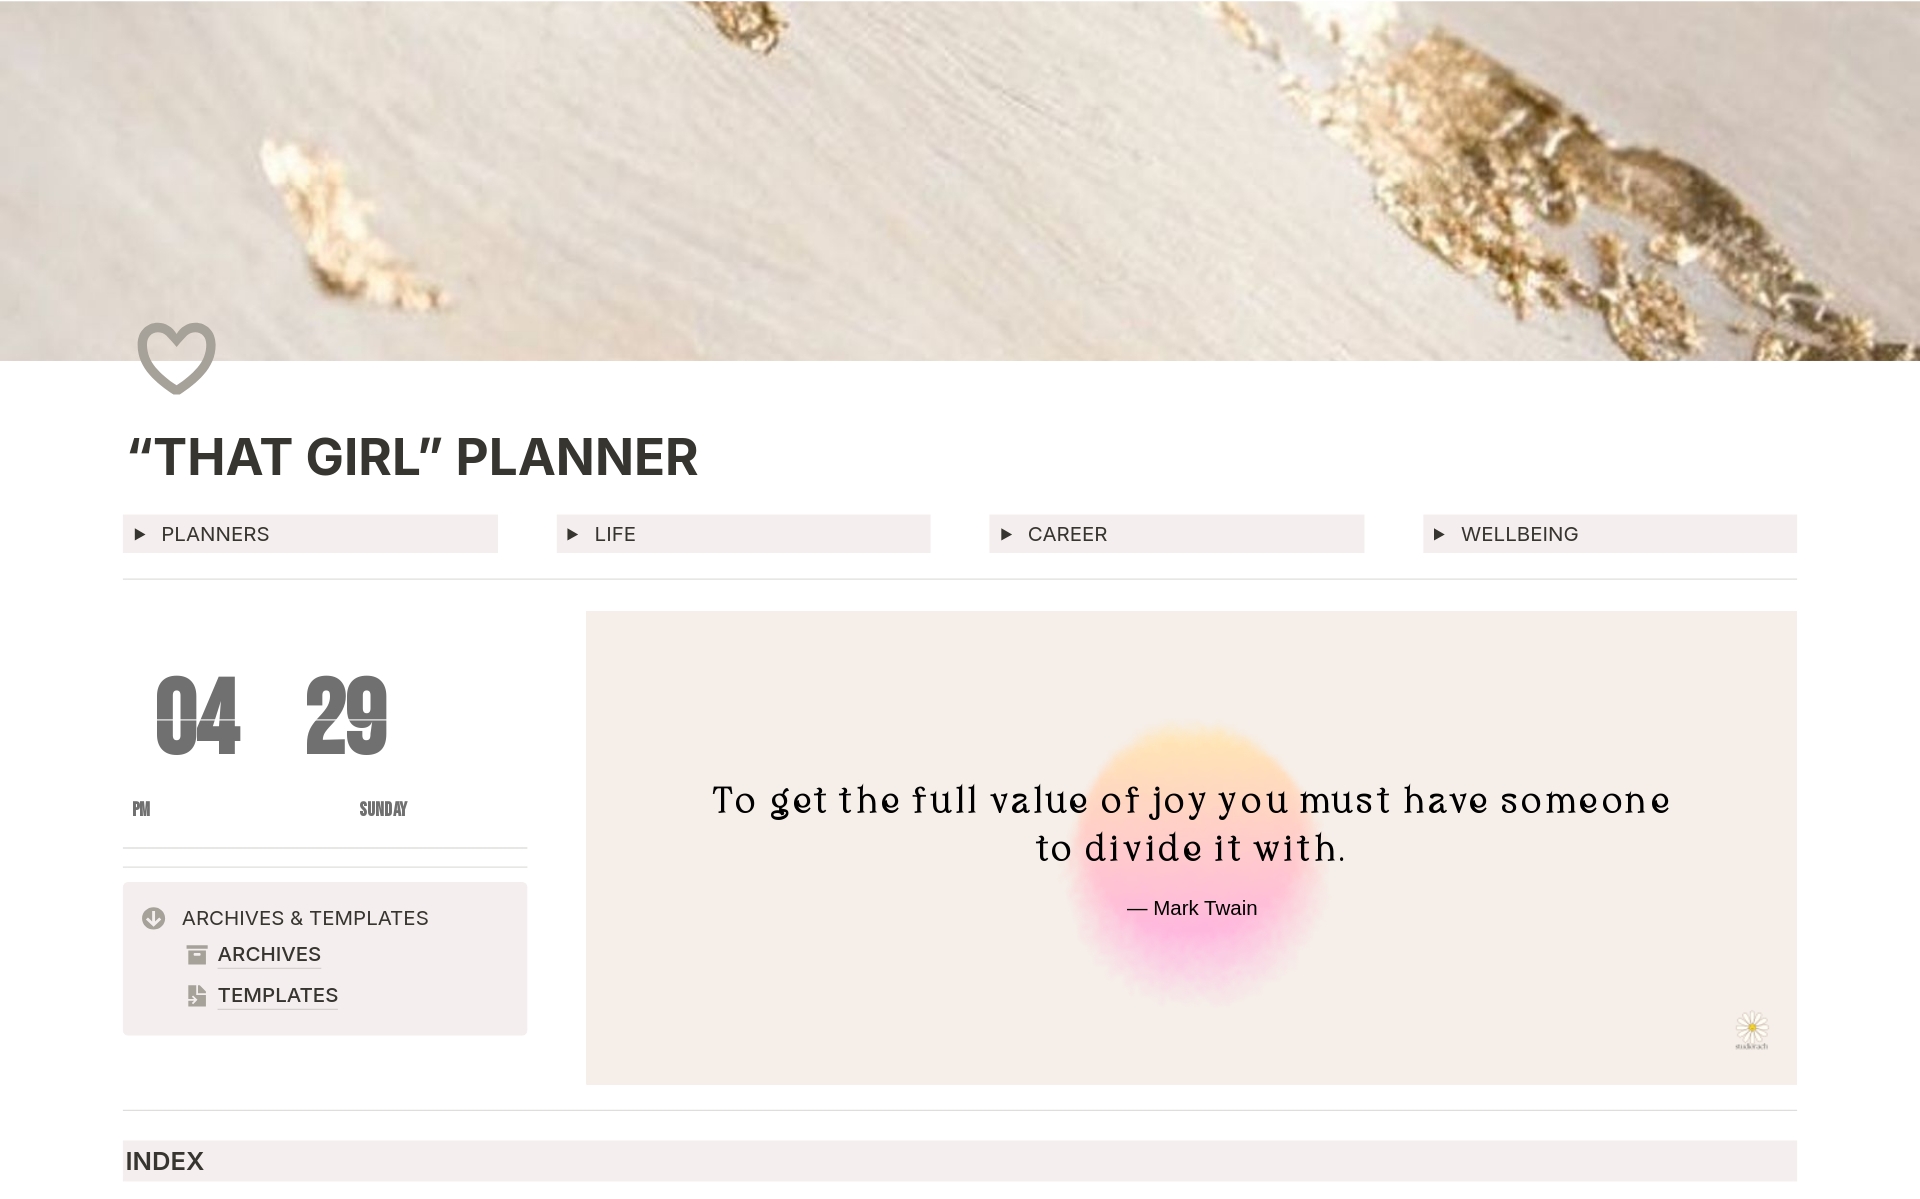 Welcome to That Girl Digital Planner - Your Ultimate Life Companion, with every life areas section: Planners, Life, Career, Wellbeing, Mind & Period Tracker - Elevate your life with organisation, productivity, wellness!